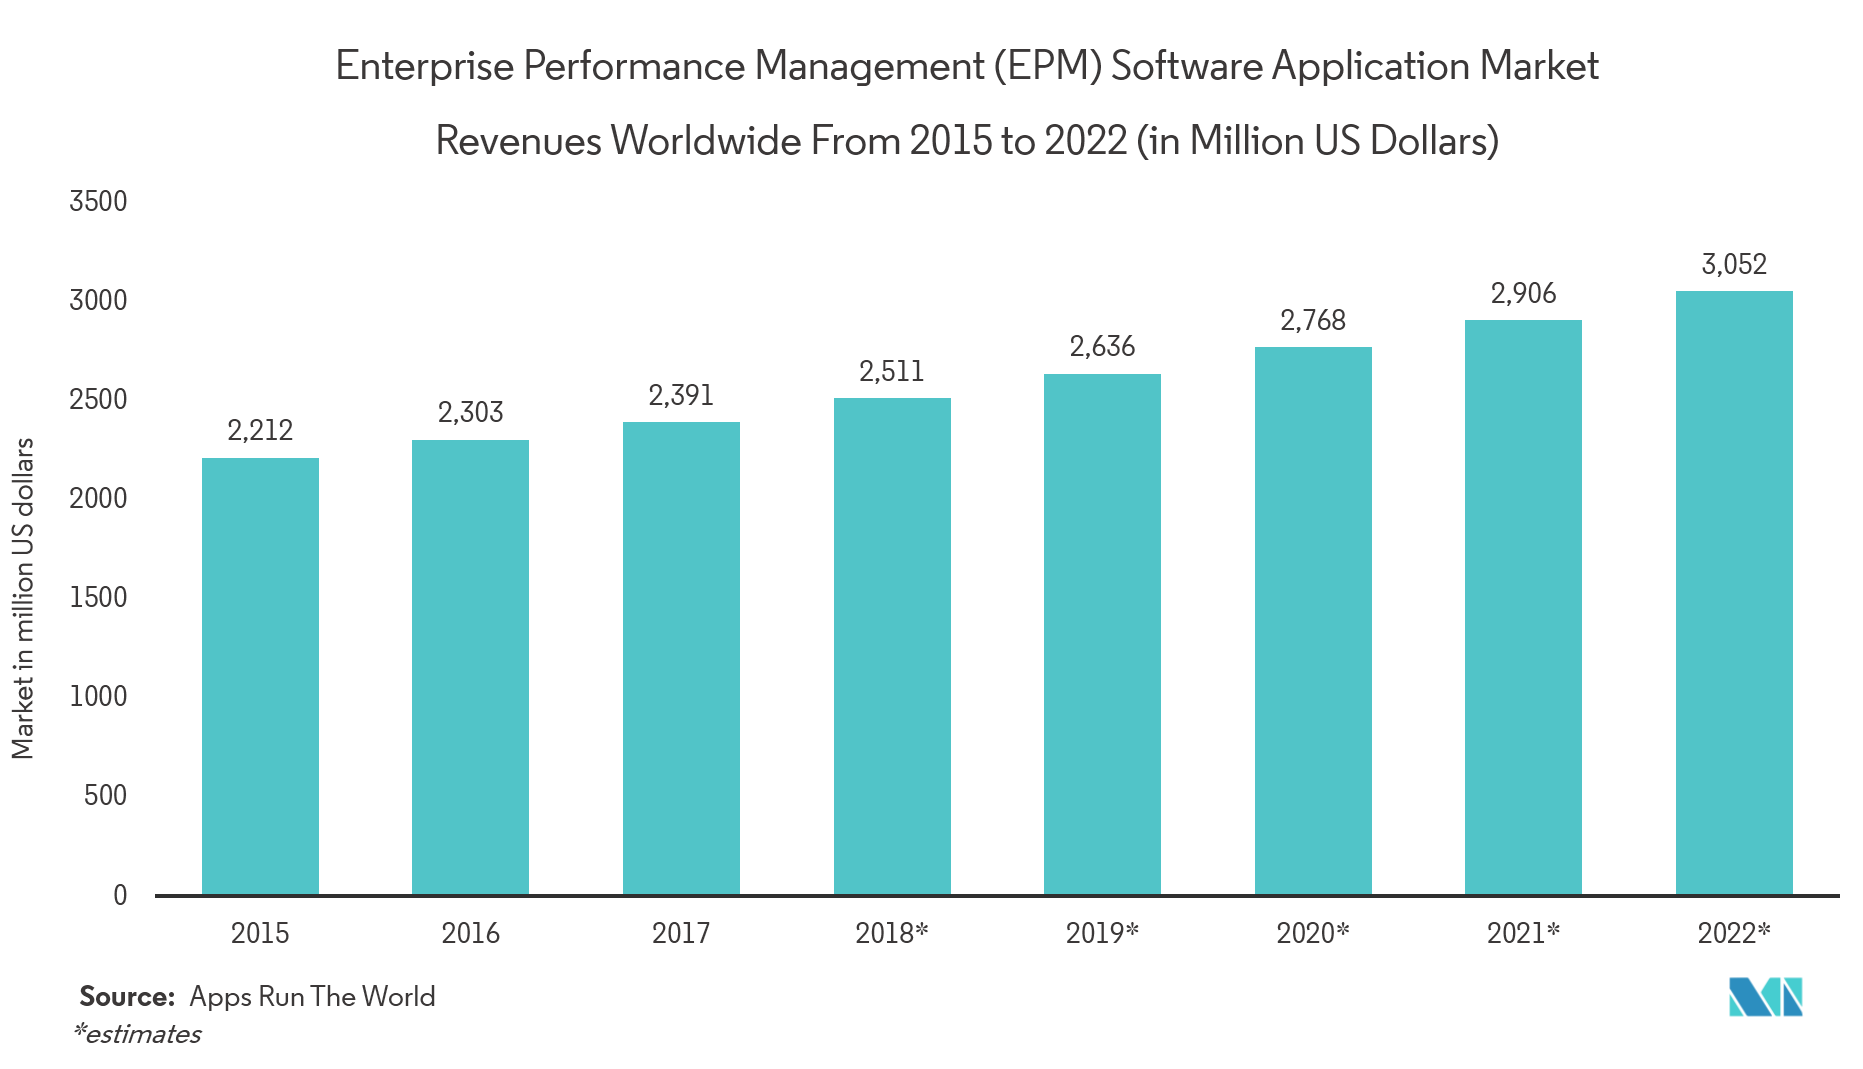 Application Performance Management Market : Enterprise Management (EPM) Software Application Market Revenues Worldwide From 2015 to 2022 (in Million US Dollars)